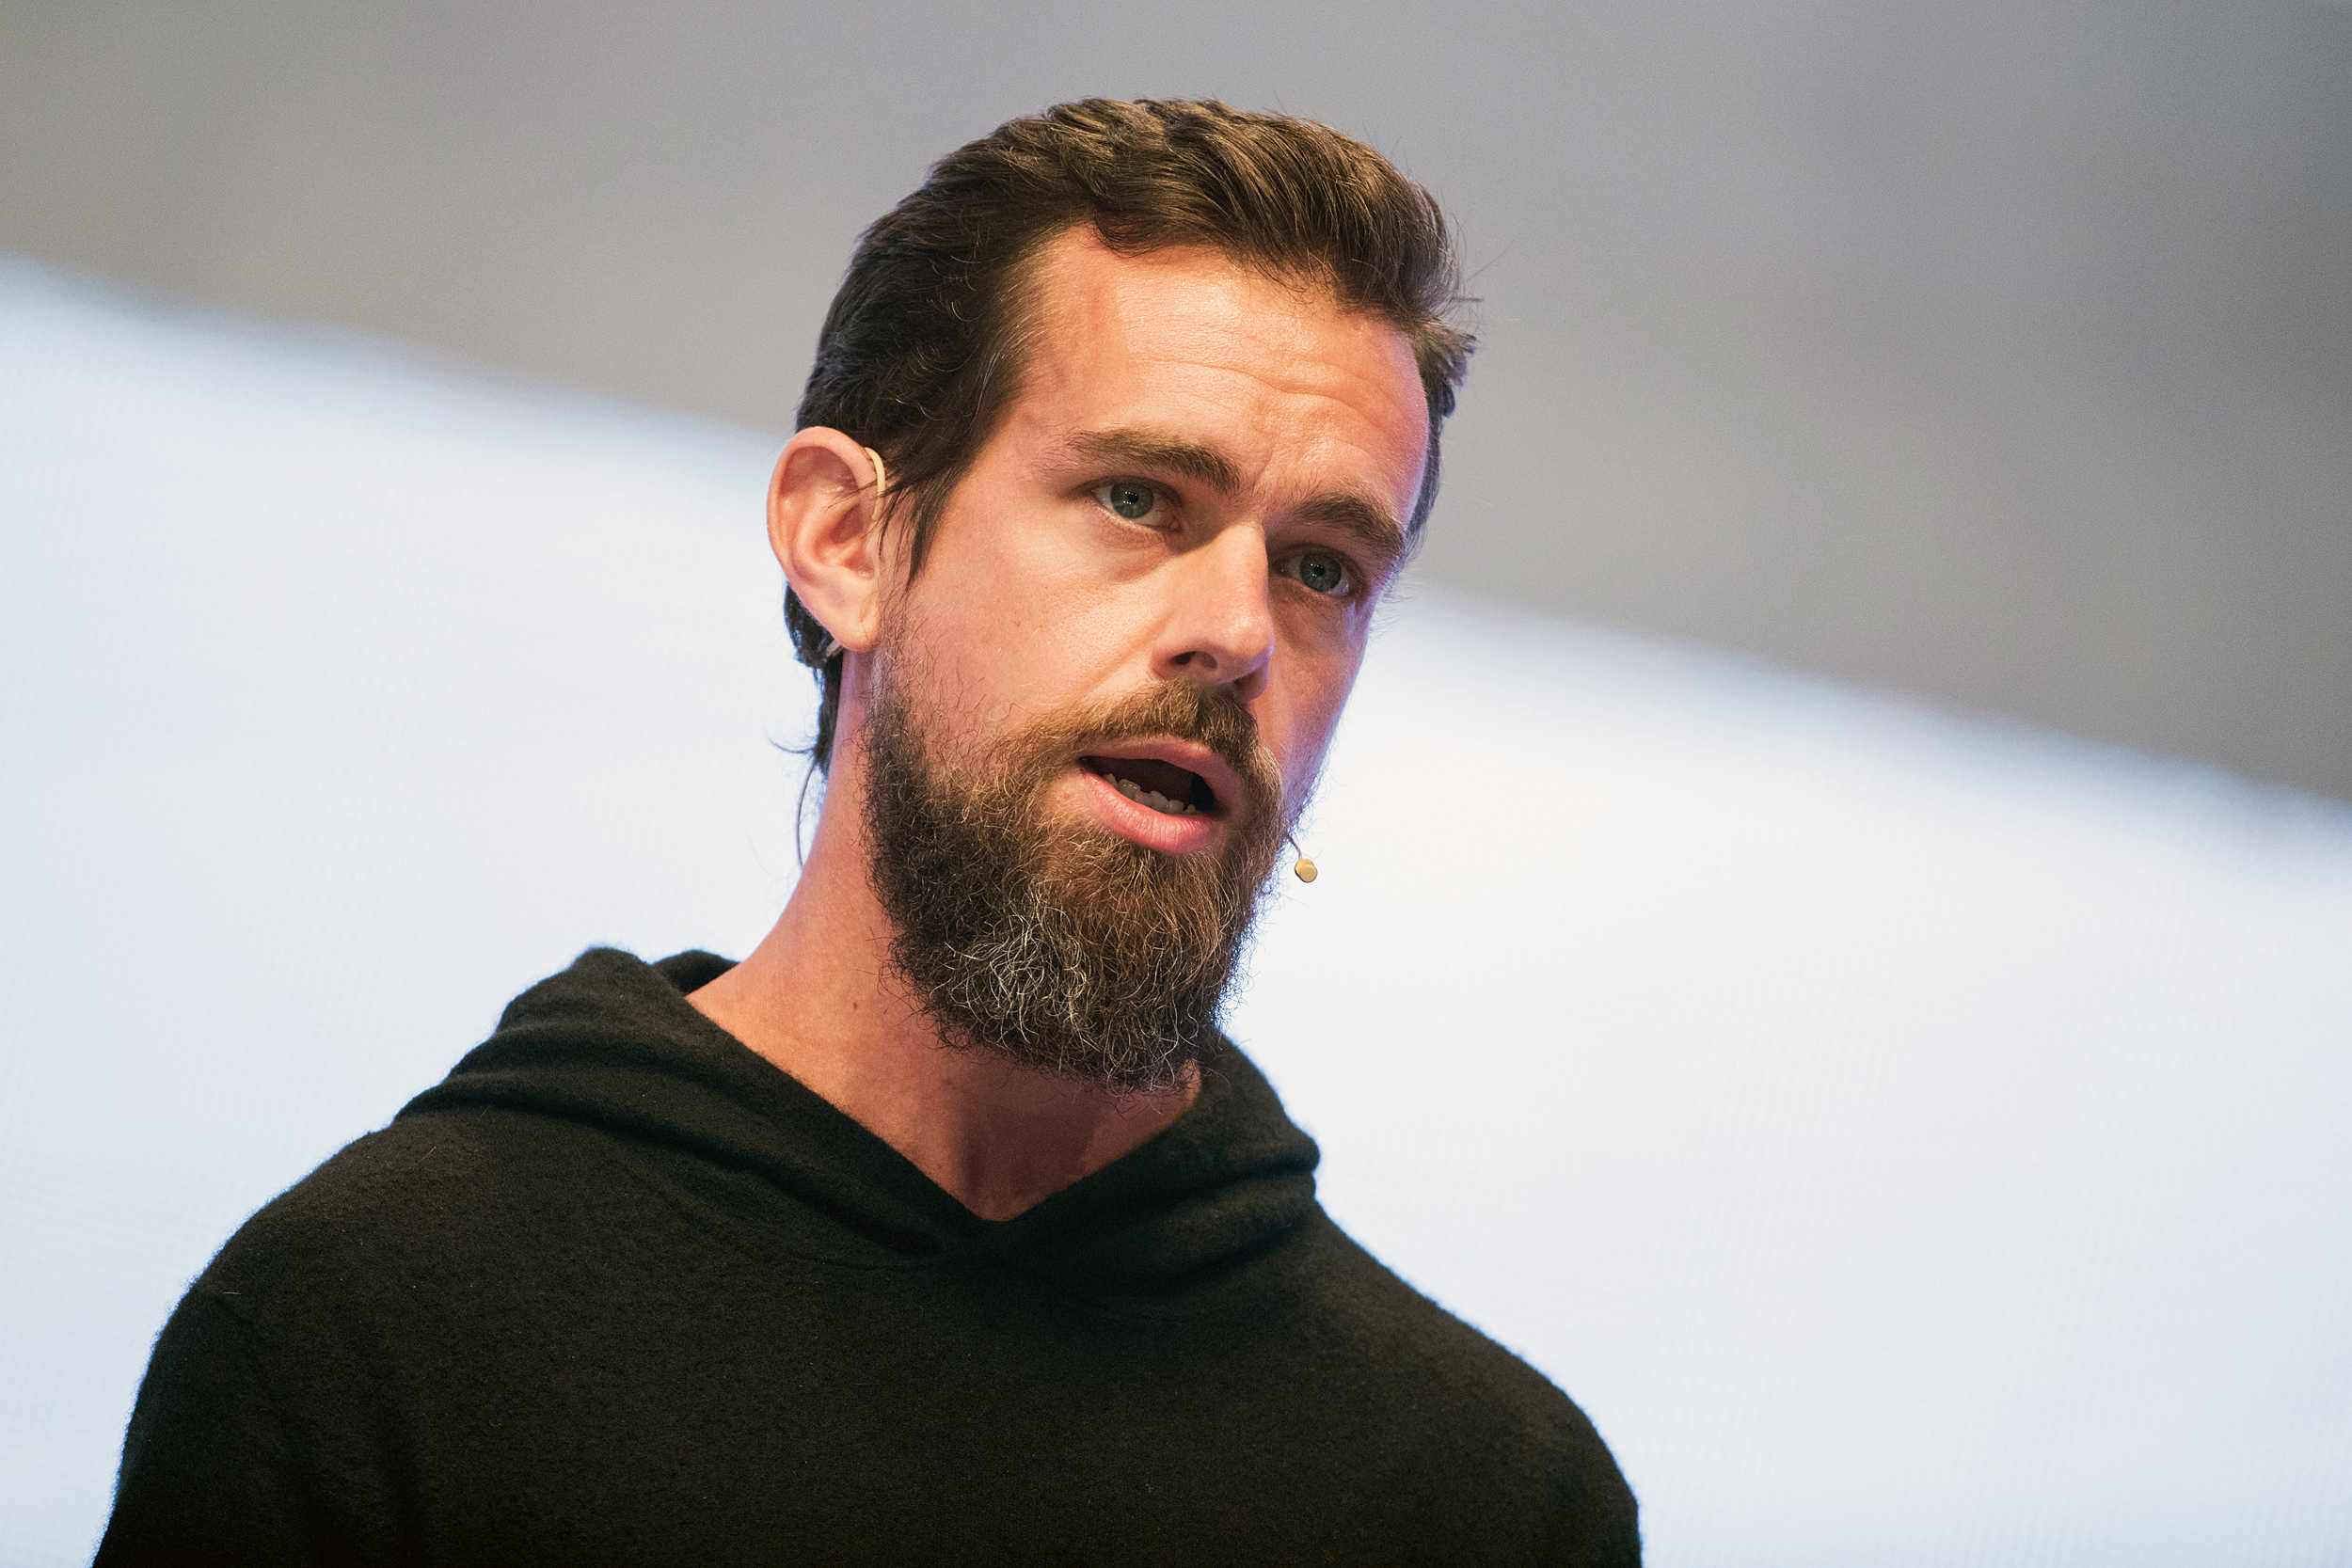 Hackers Were Able To Hack Twitter Founder Jack Dorsey's Account!